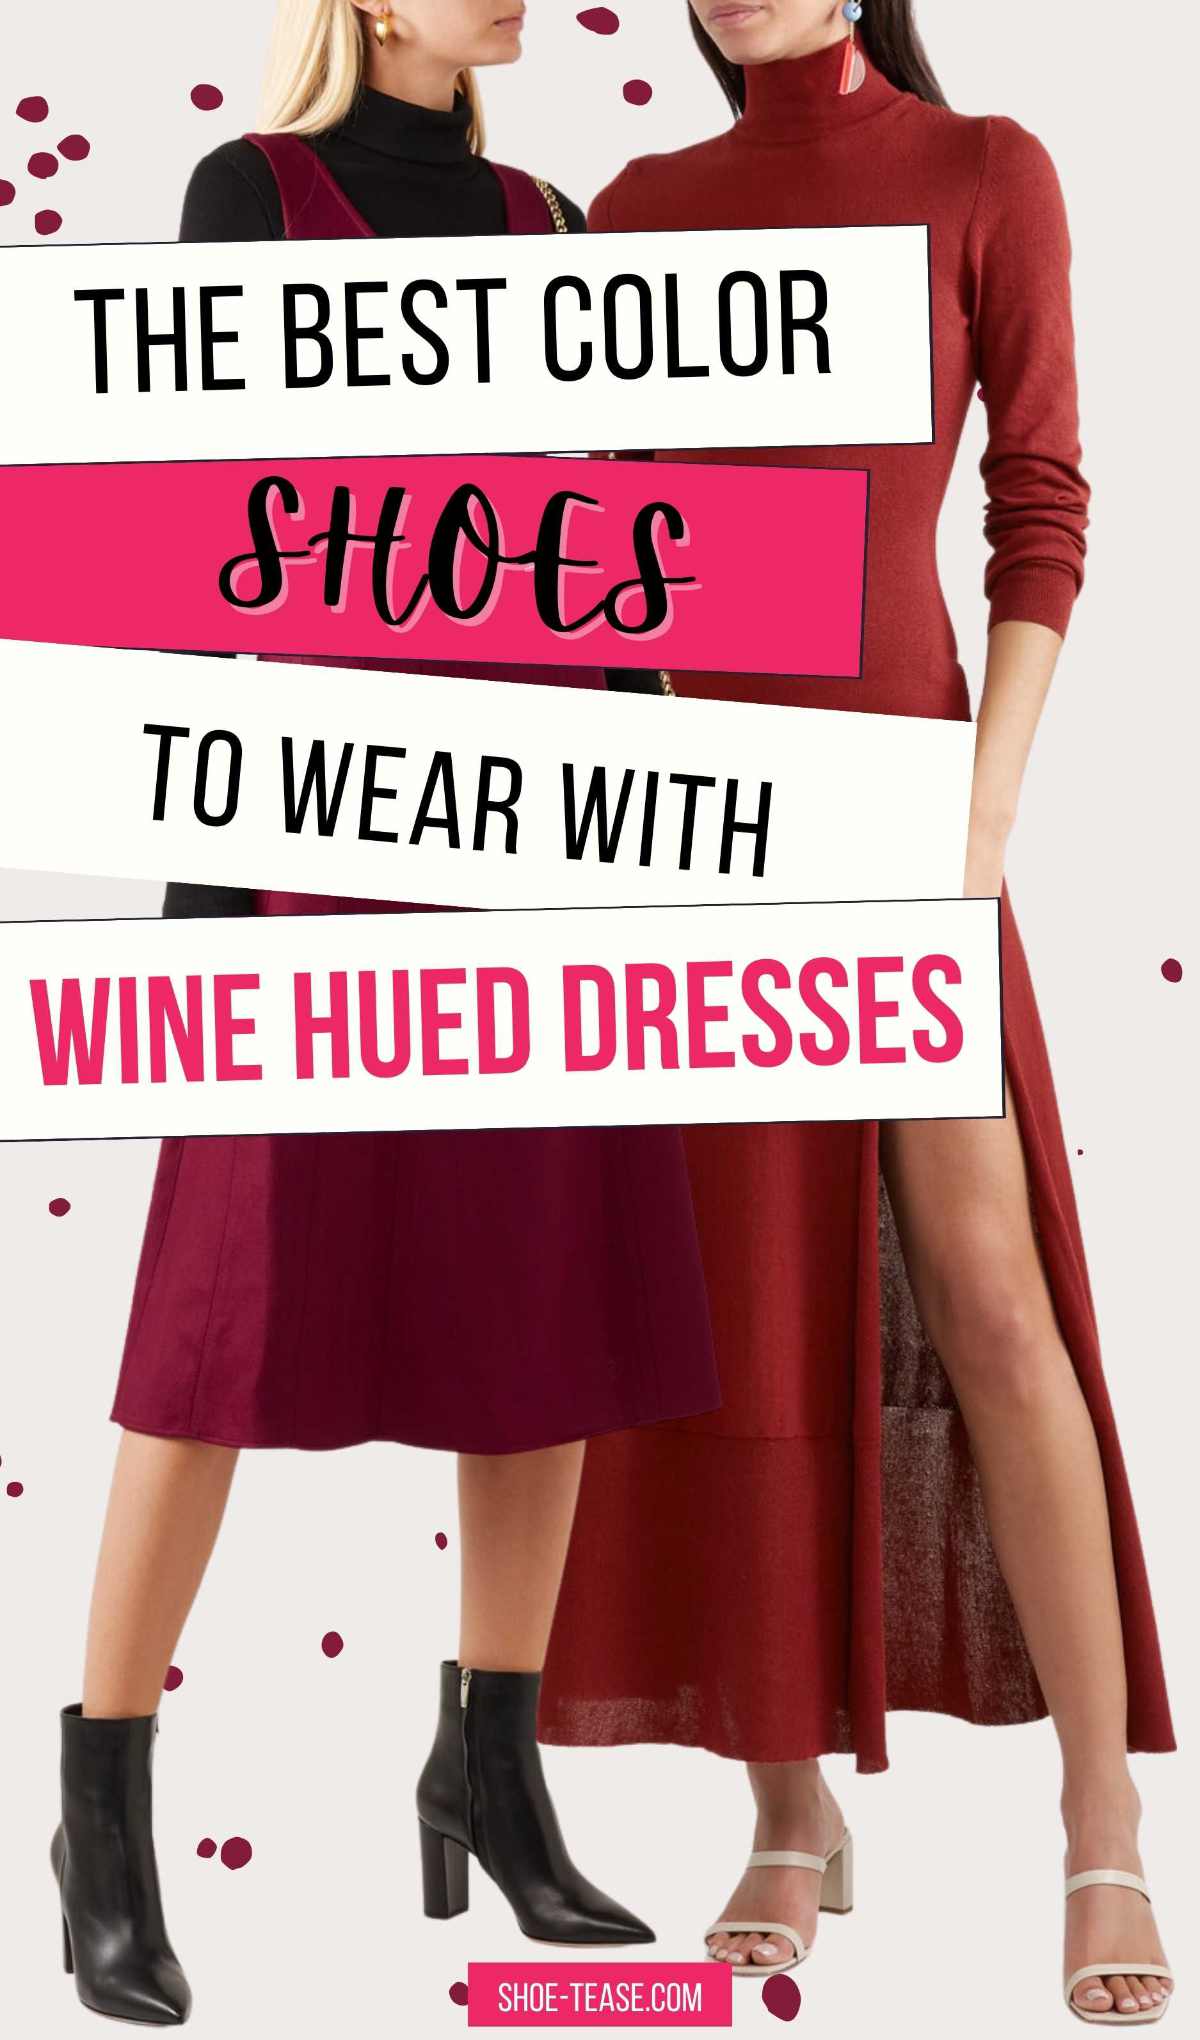 Collage of 2 women wearing different color shoes with burgundy dresses with overlaid text.